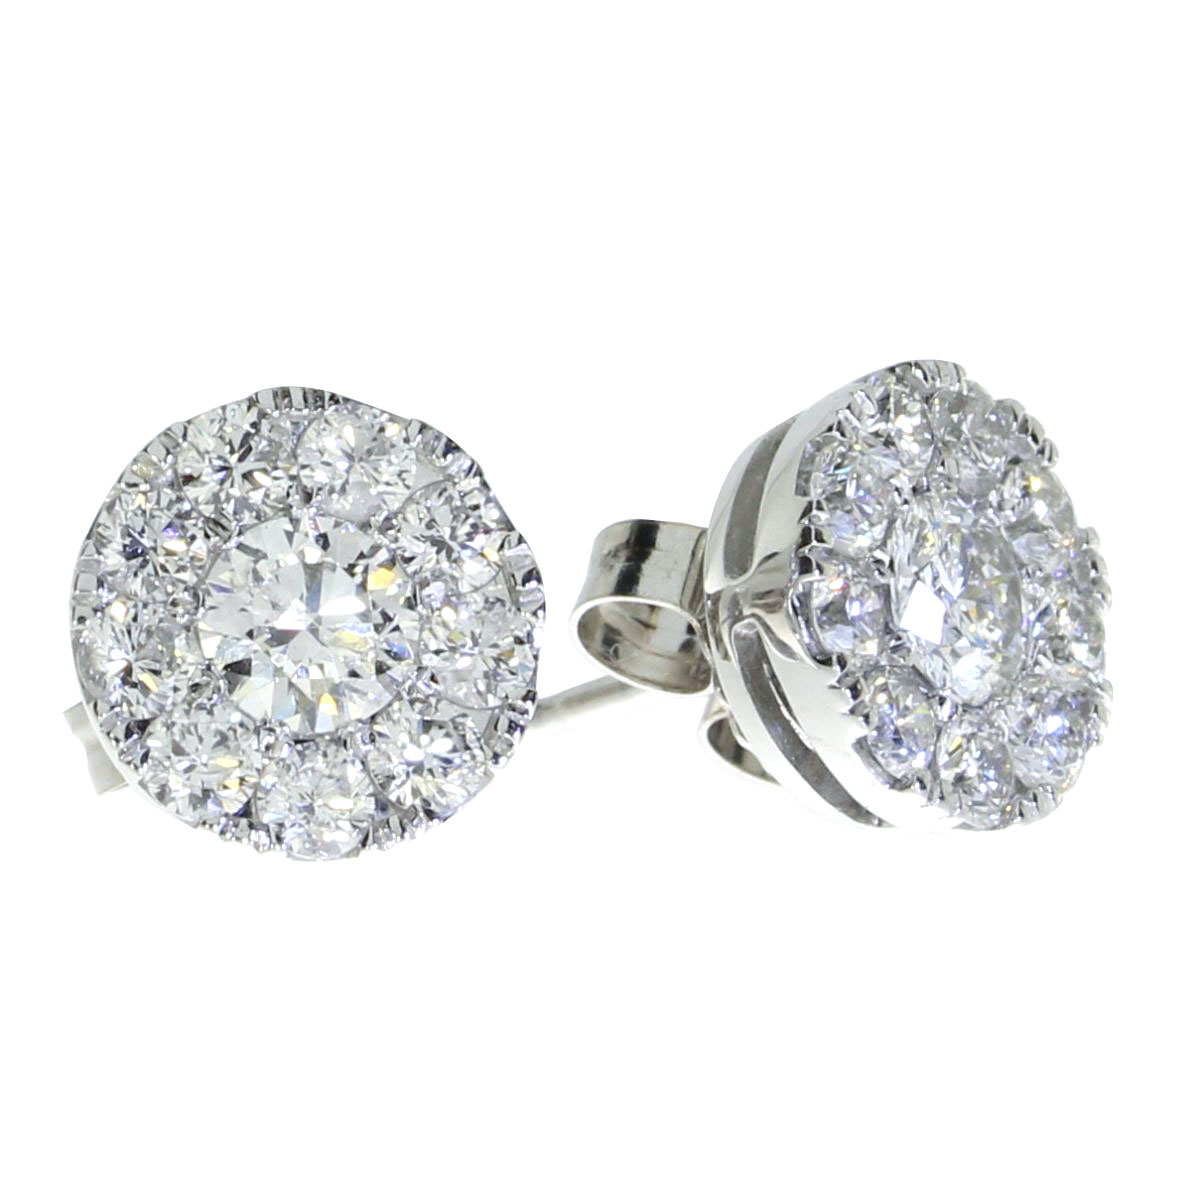 JCX2499: Gorgeous 14k white gold earrings with a full carat cluster of shimmering high quality diamonds.